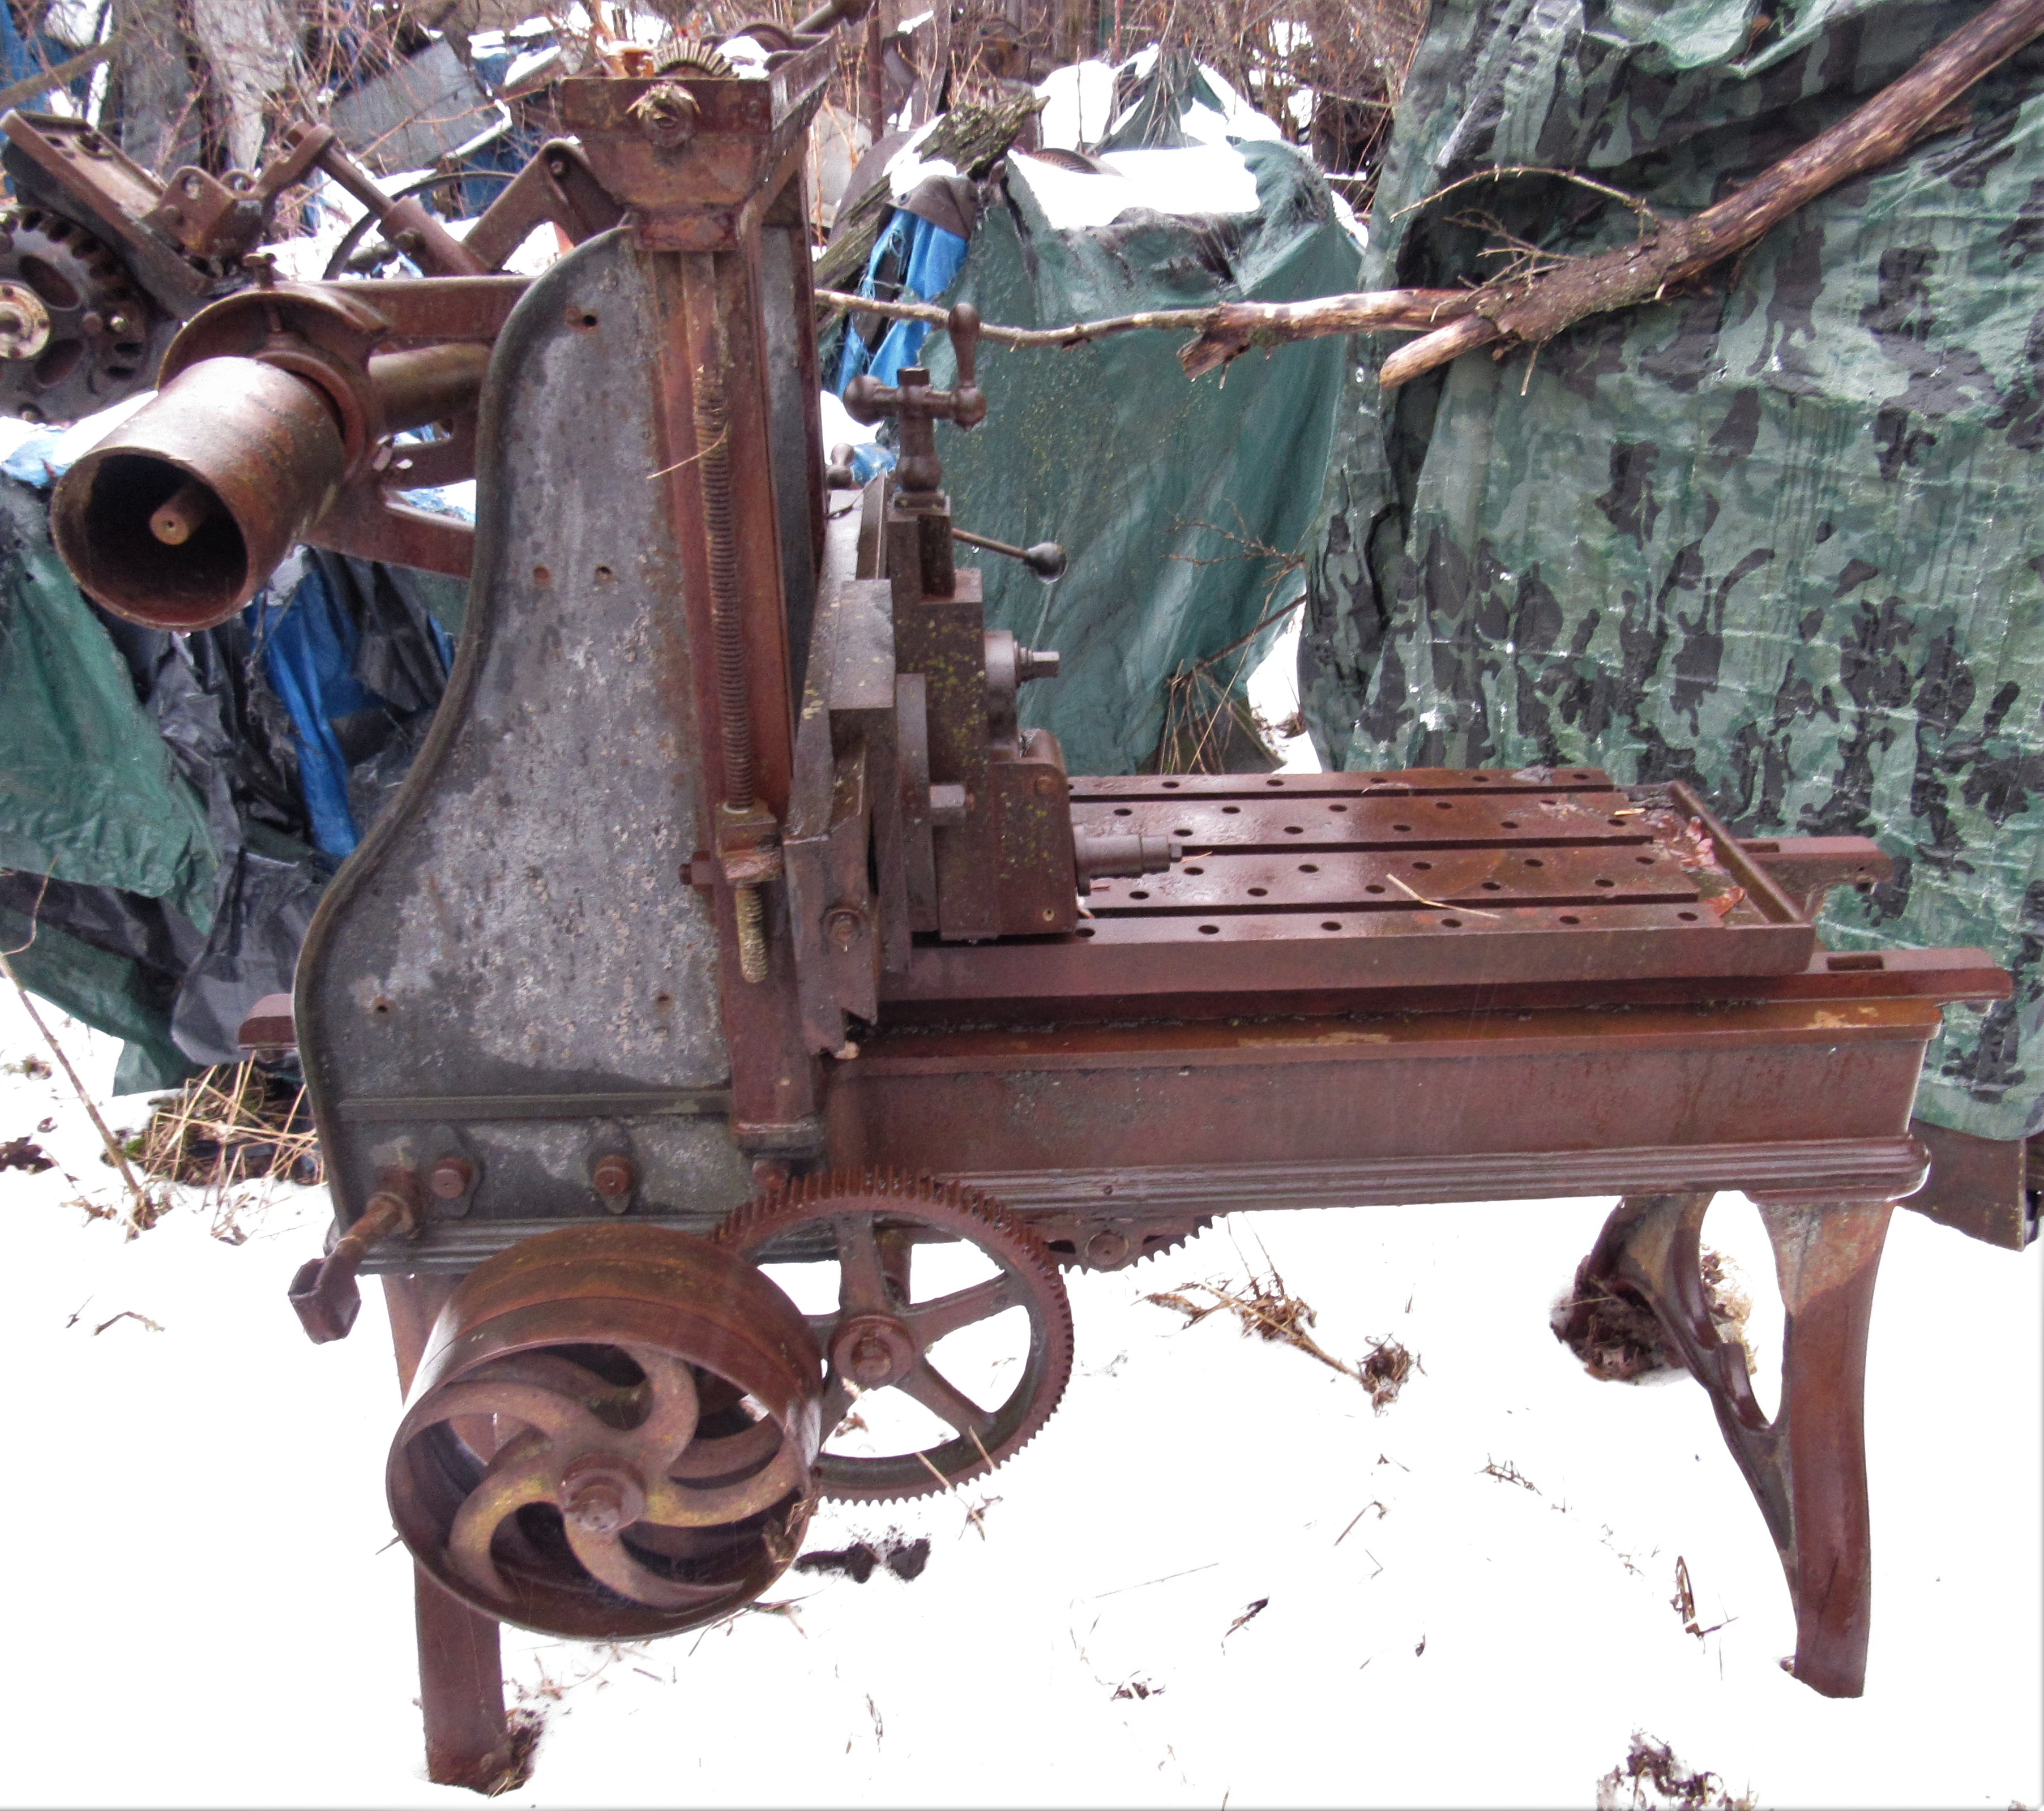 http://antiquemachinery.com/images-2020/IMG_0714-Antique-Old-Vintage-Machines-I-Bought-are-home-safe--New-Haven-1870-1890s-Metal-Planer-side.JPG